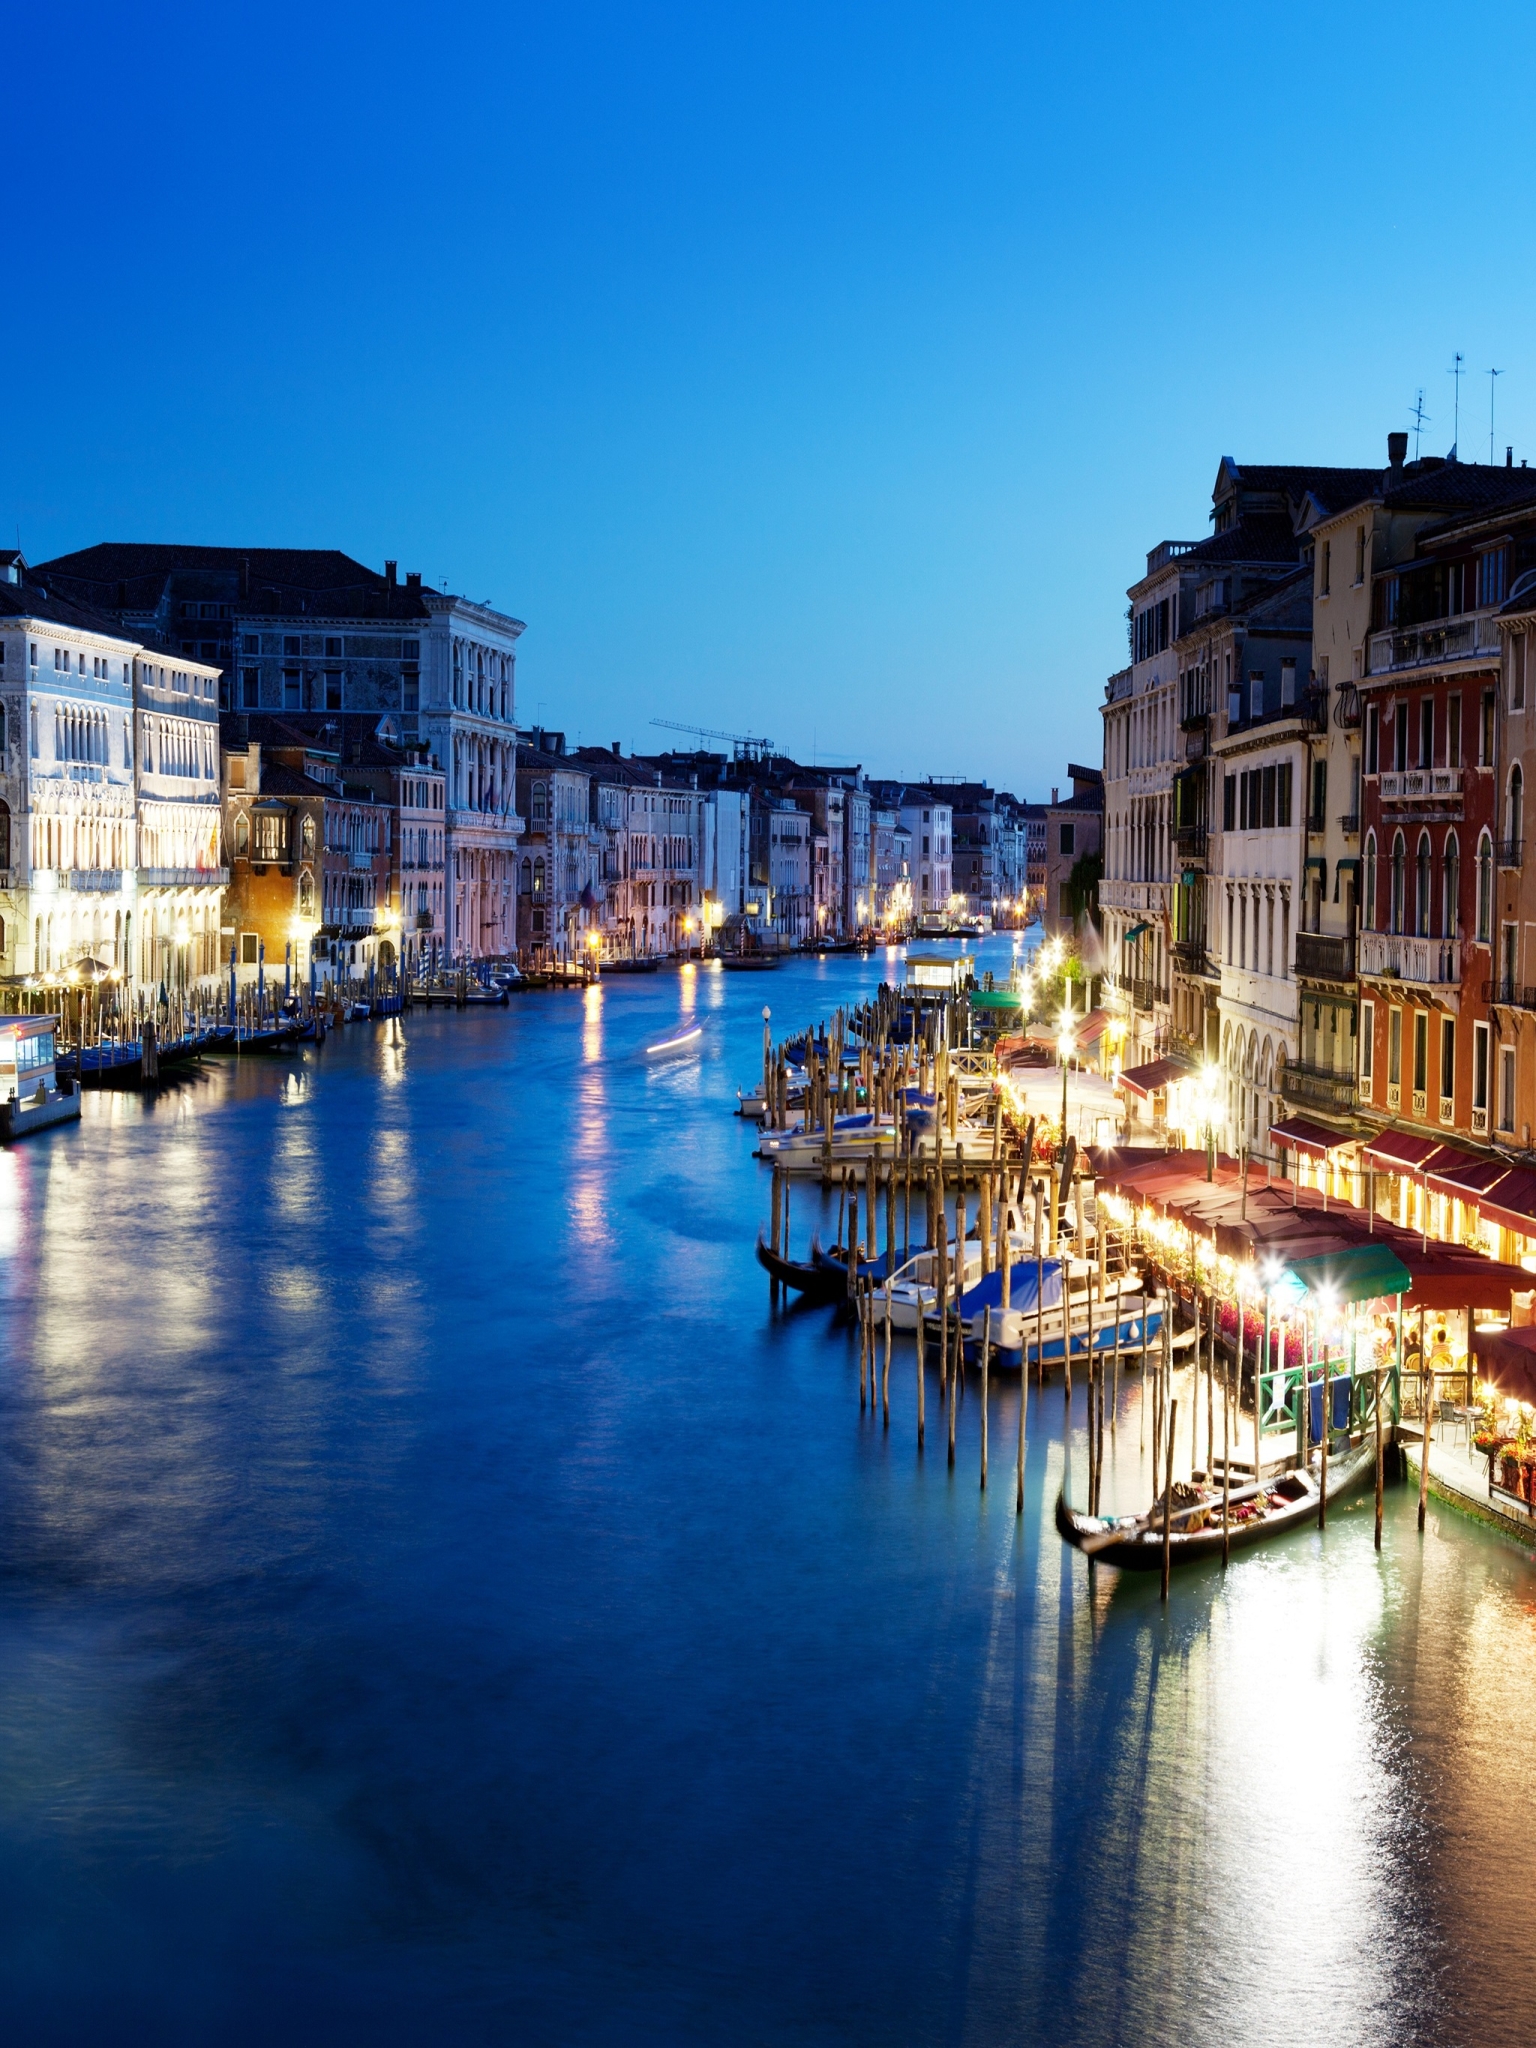 Grand Canal Venice for Apple iPad Air 2 resolution